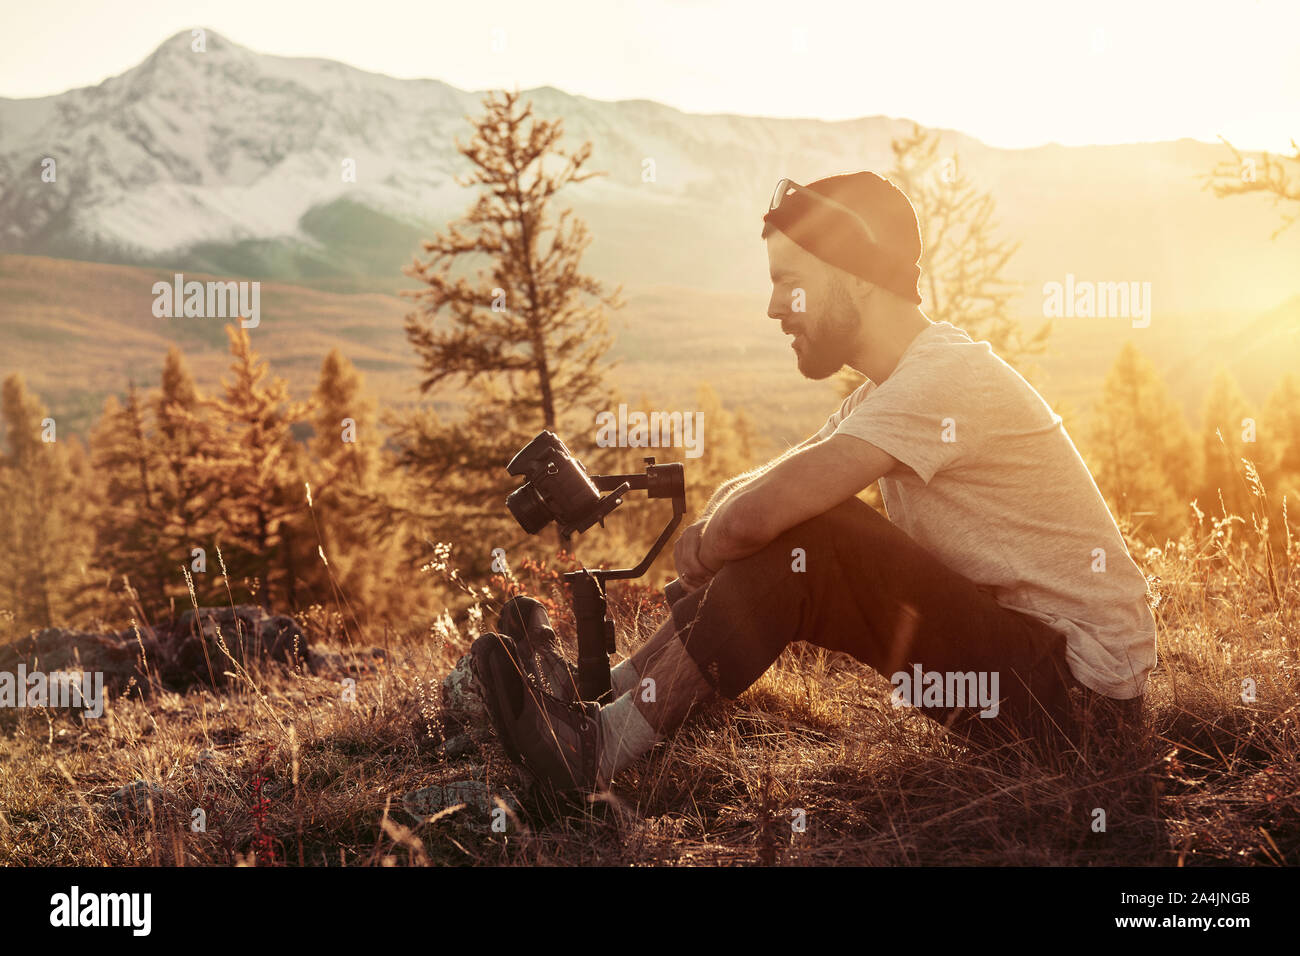 Man sits with electronic gimbal and dslr camera against mountains Stock Photo